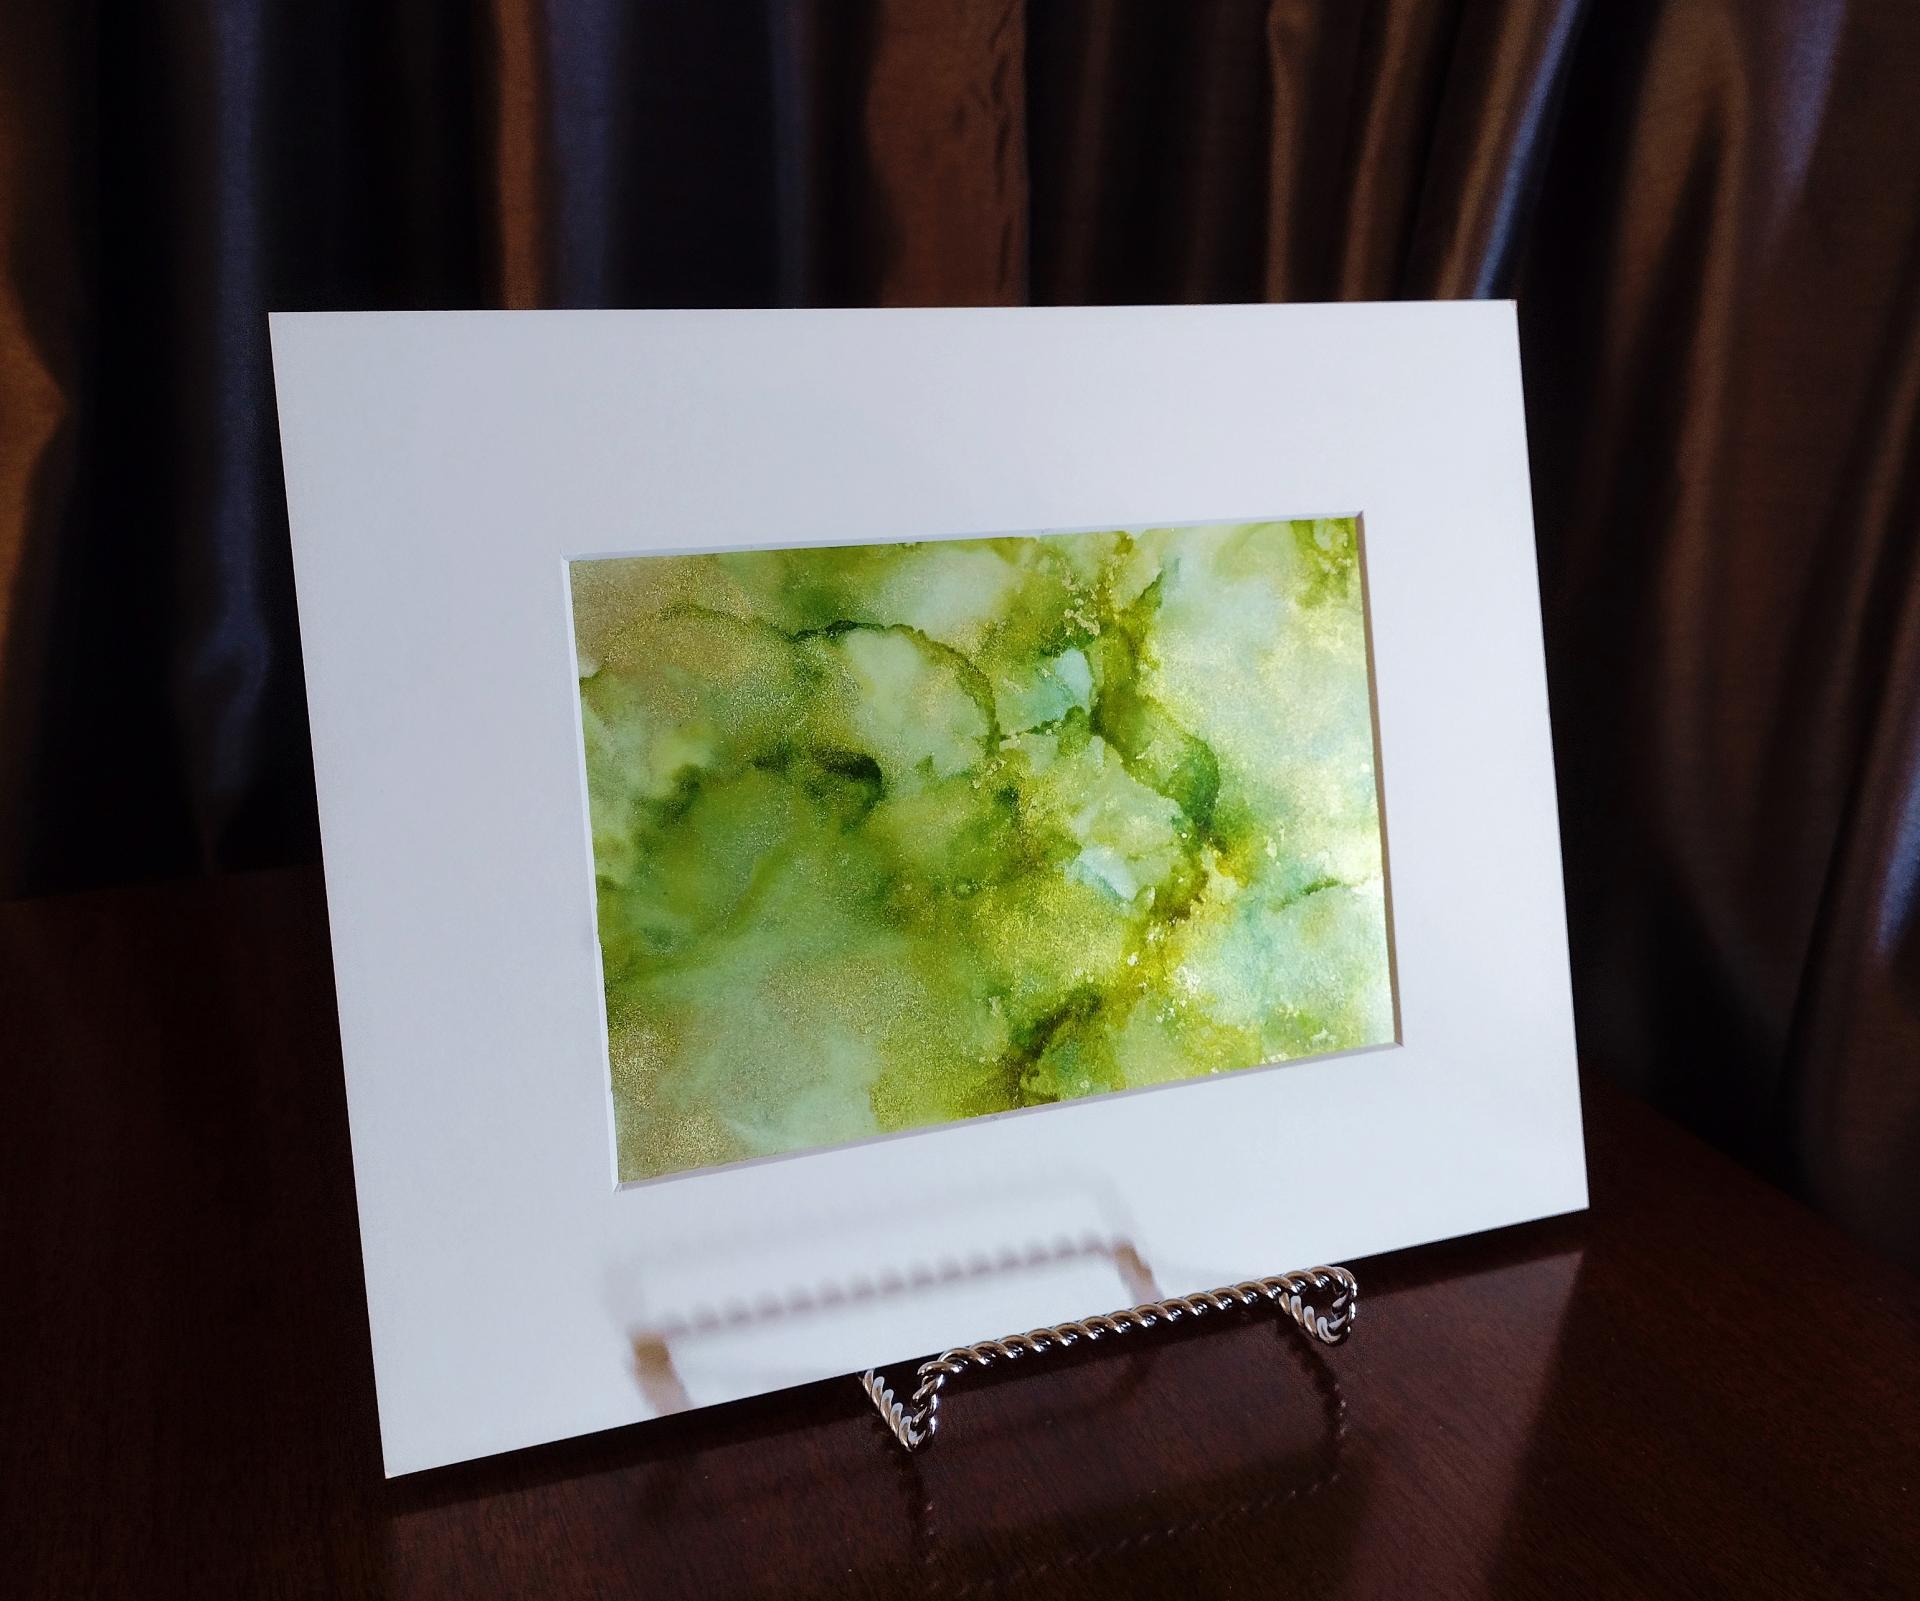 Alcohol Ink Painting, 5 x 7 Matted to 8 x 10, Green and Gold Abstract Art